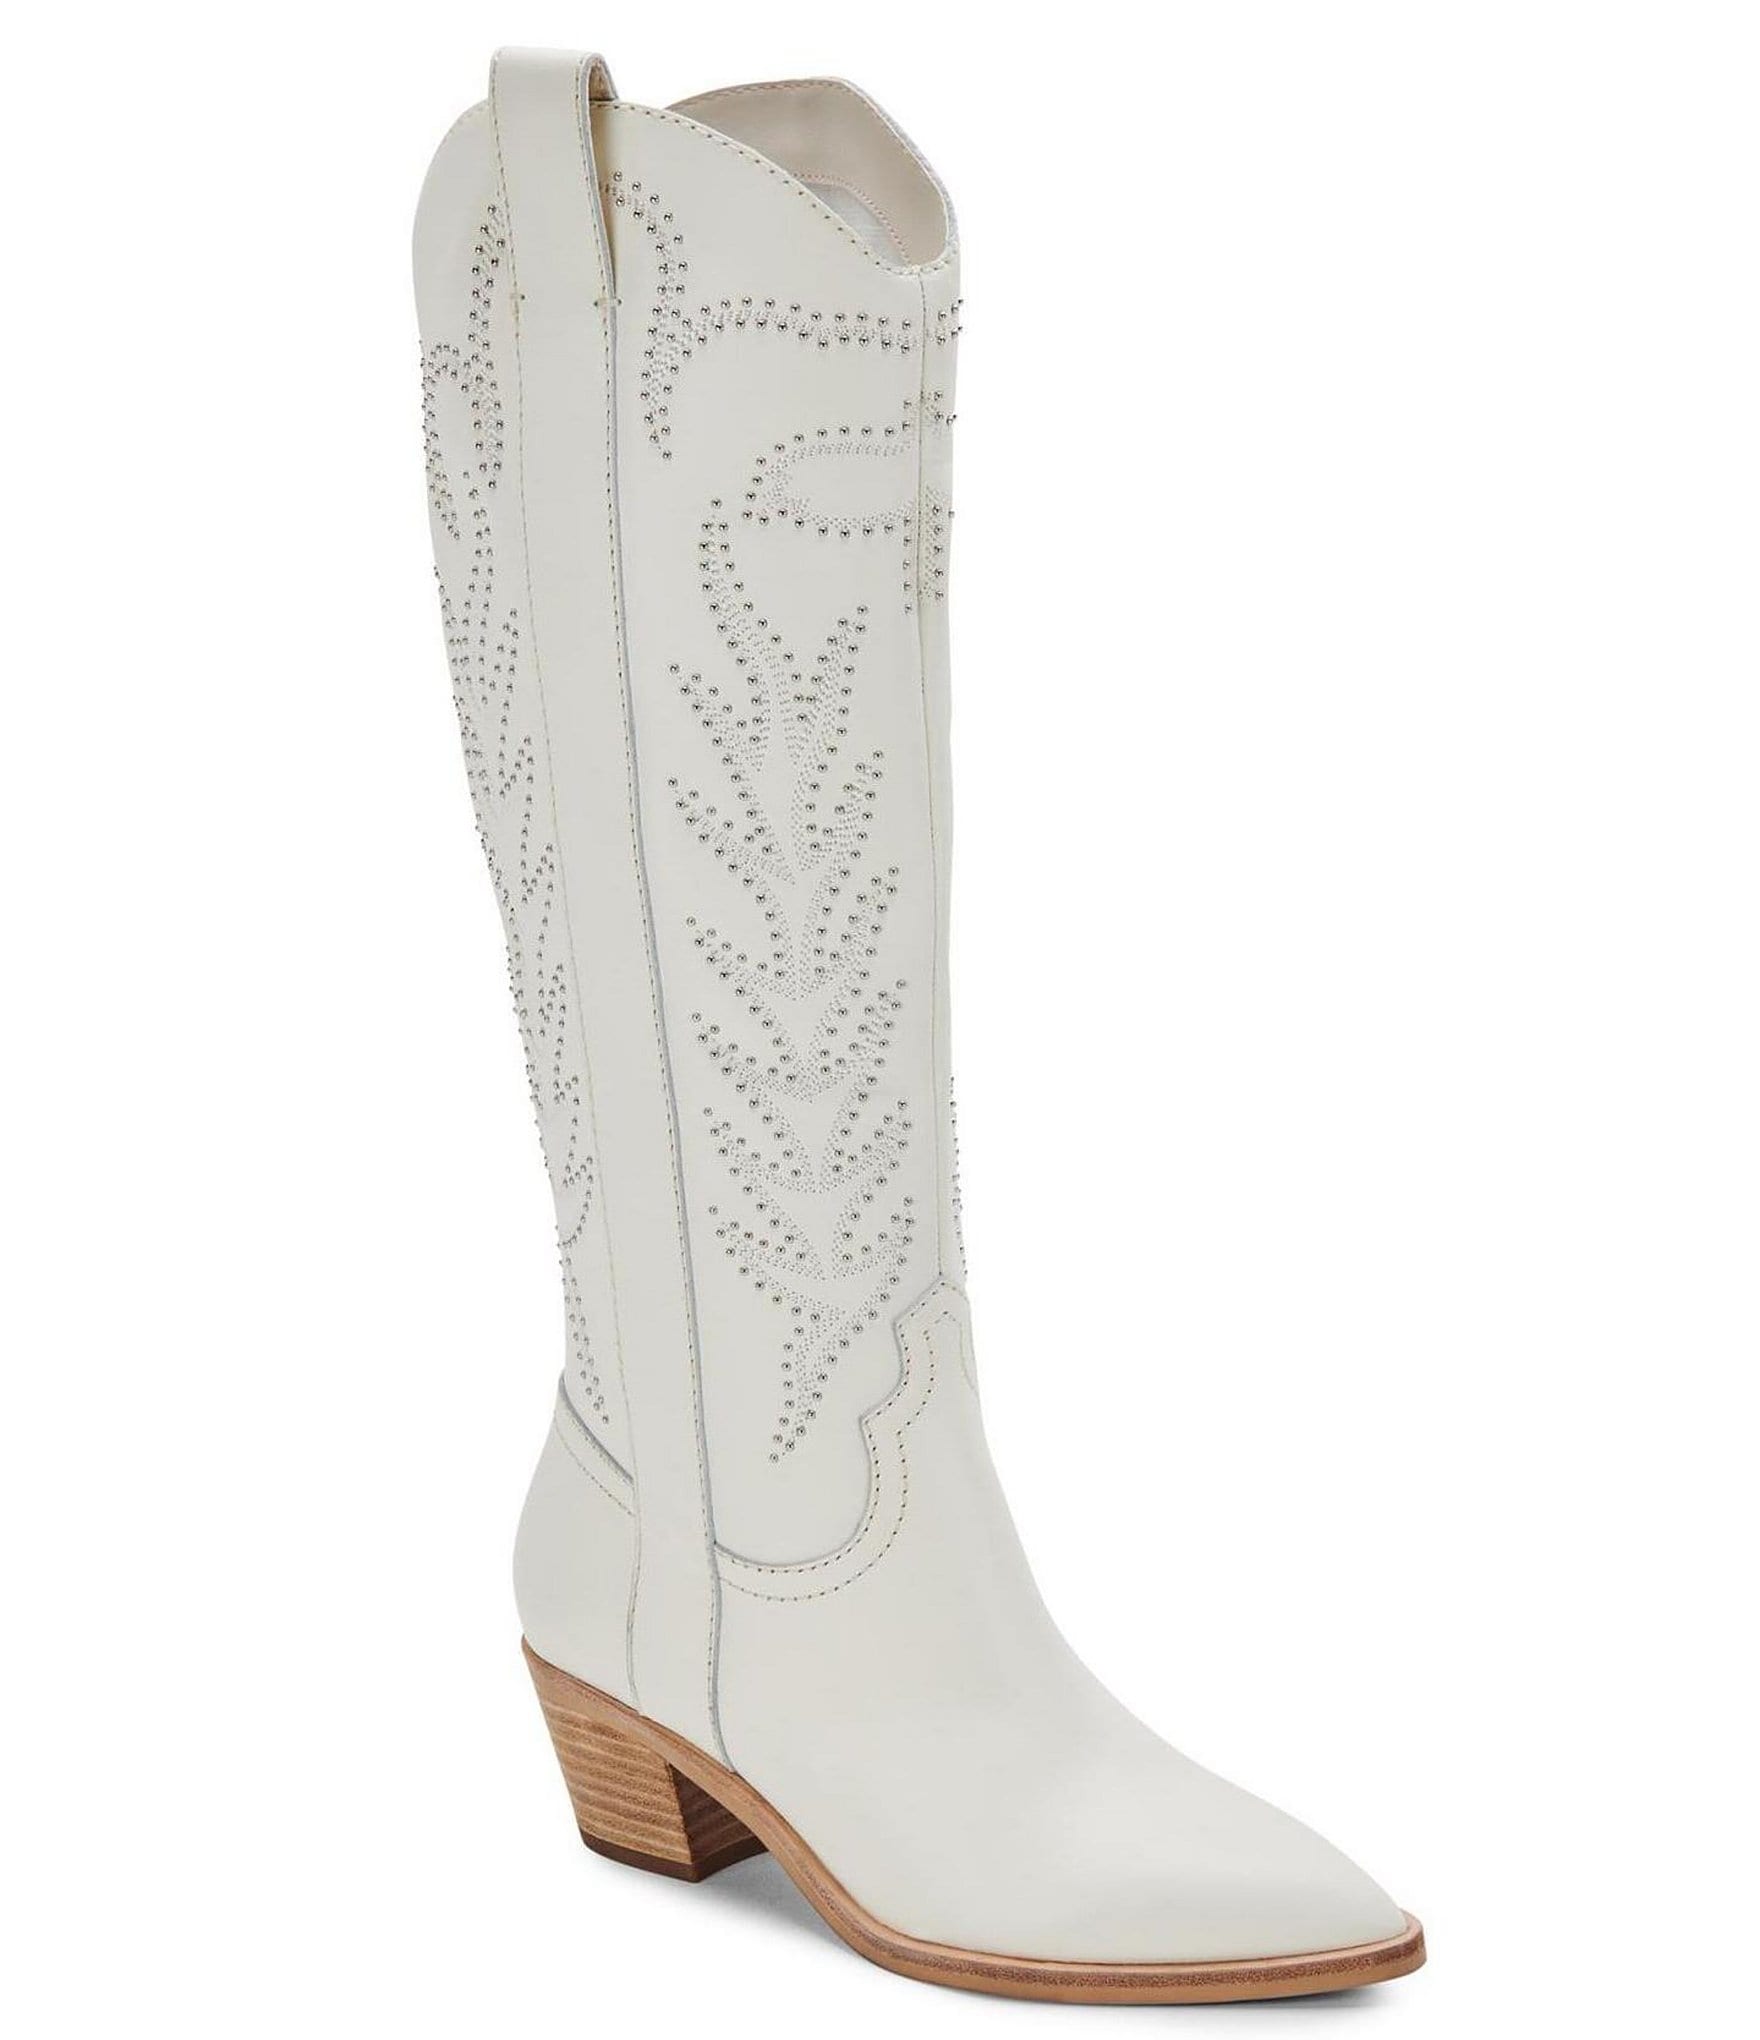 Dolce Vita Solei Studded Leather Western Inspired Tall Boots | Dillard's